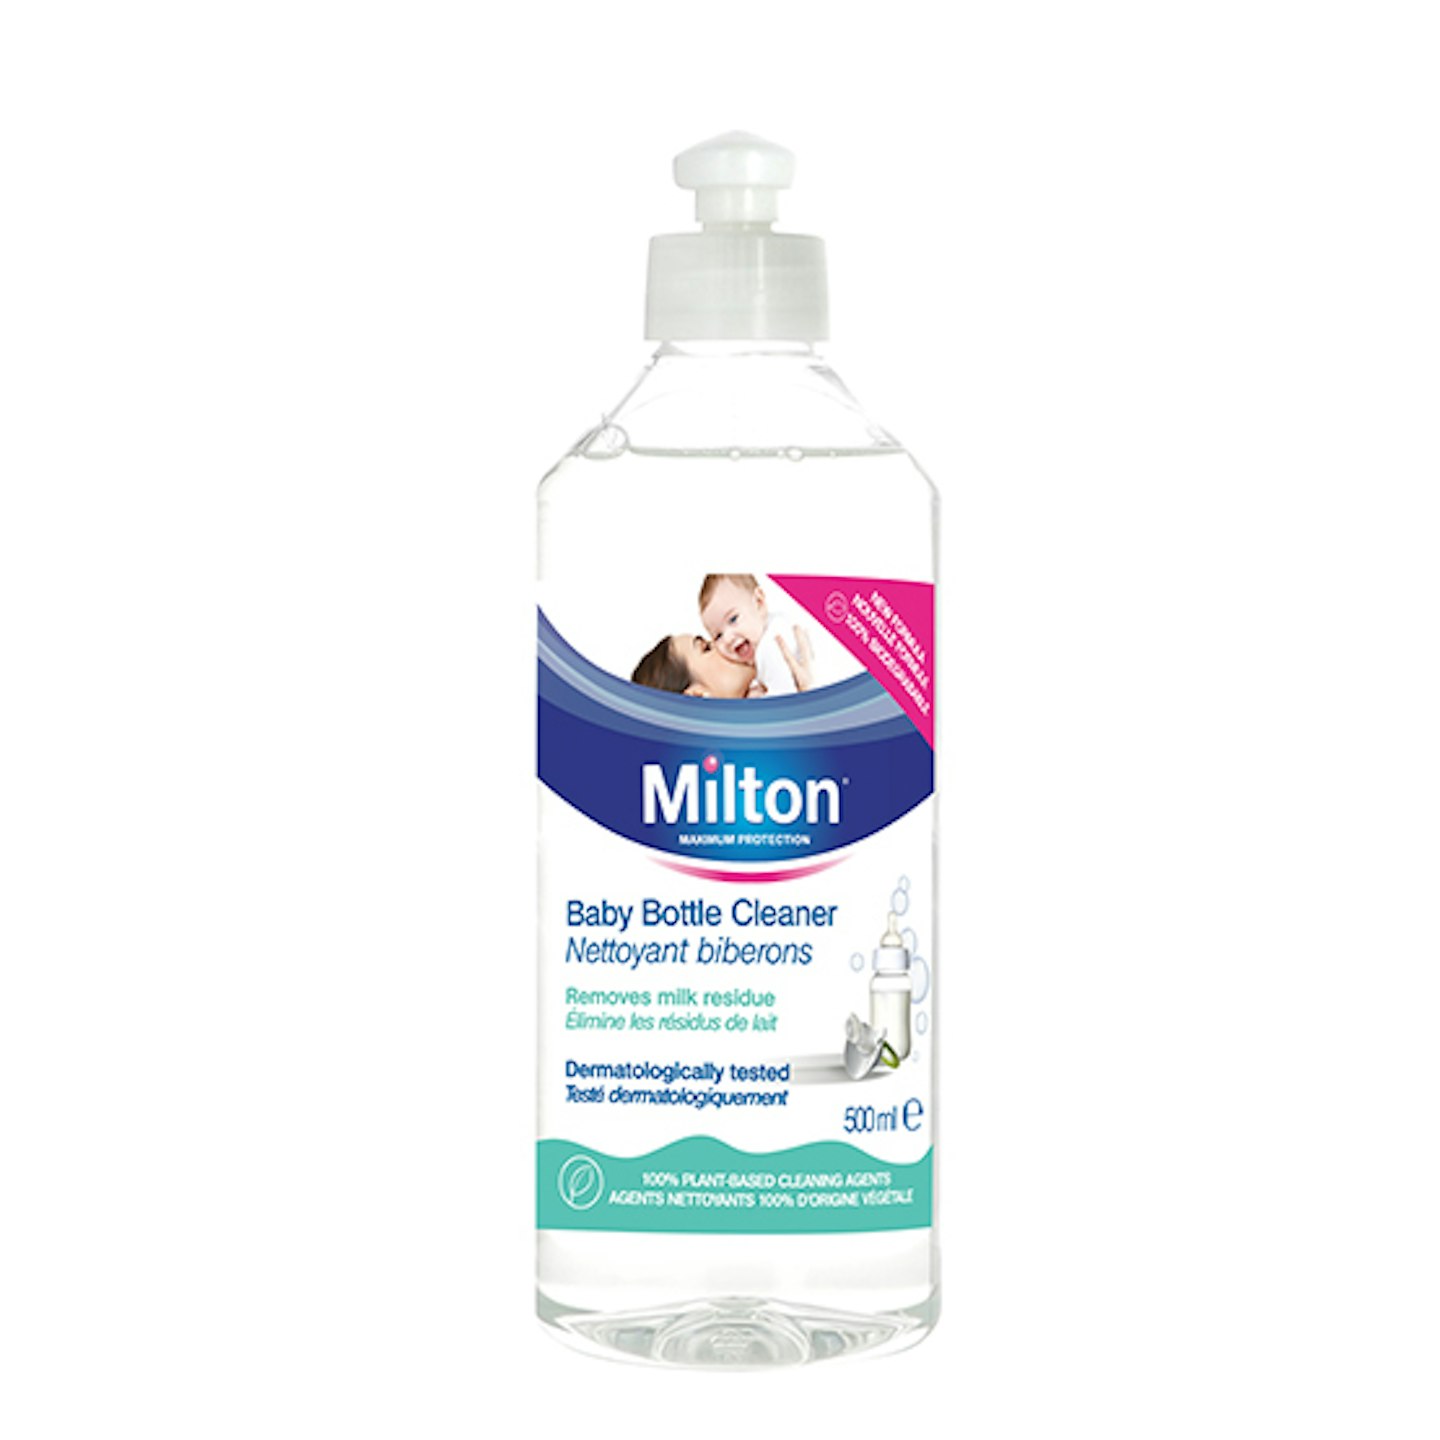 Milton Baby Bottle Cleaner product